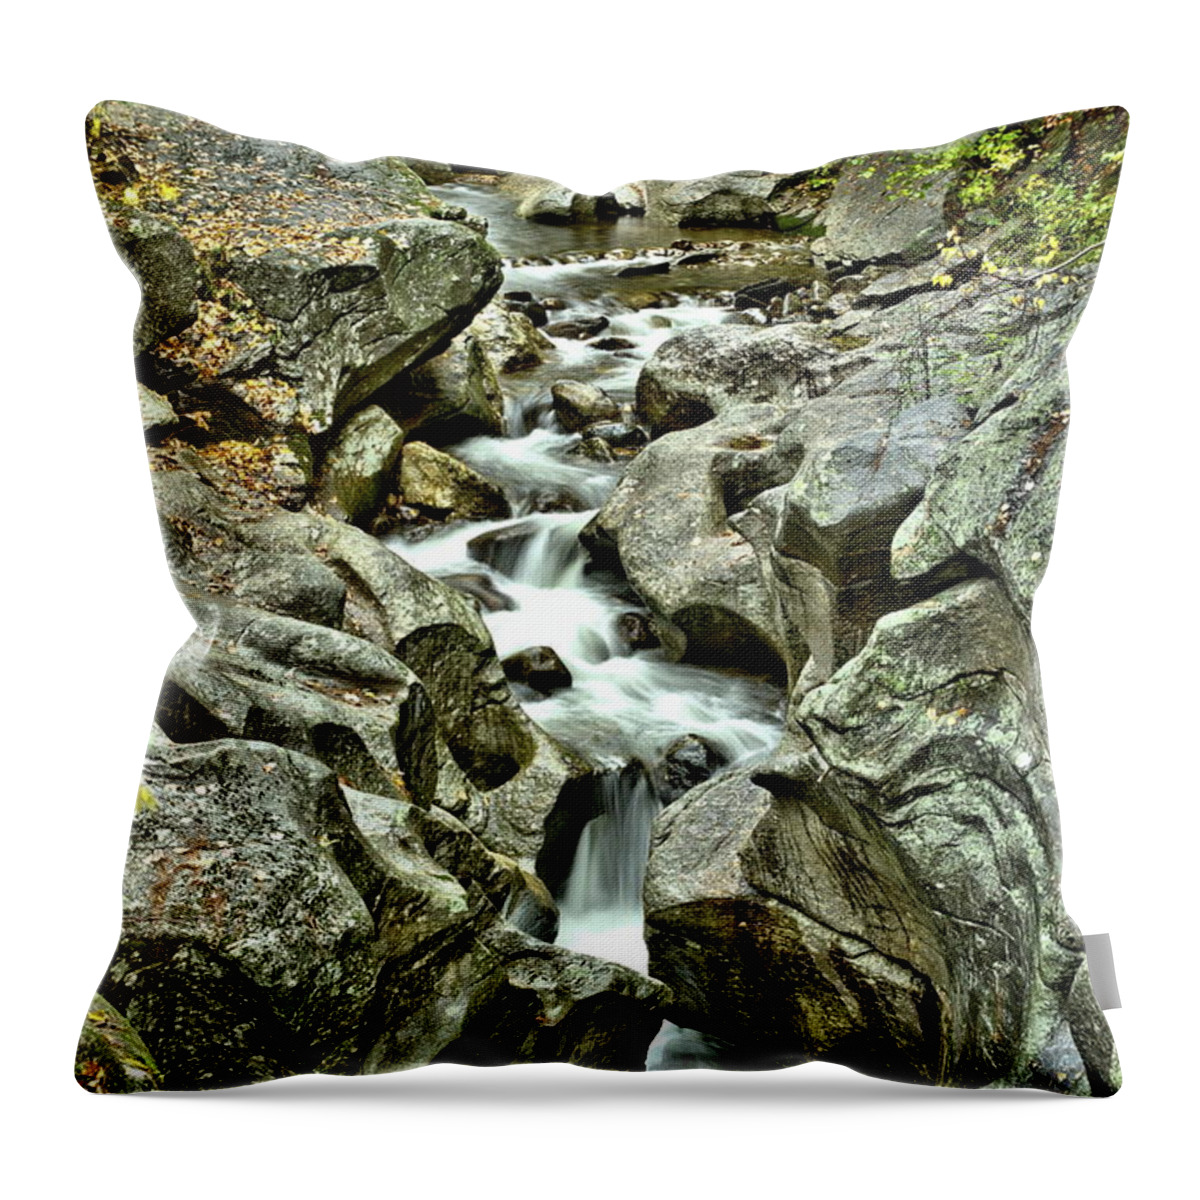 Waterfall Throw Pillow featuring the pyrography Carving and Time by Harry Moulton